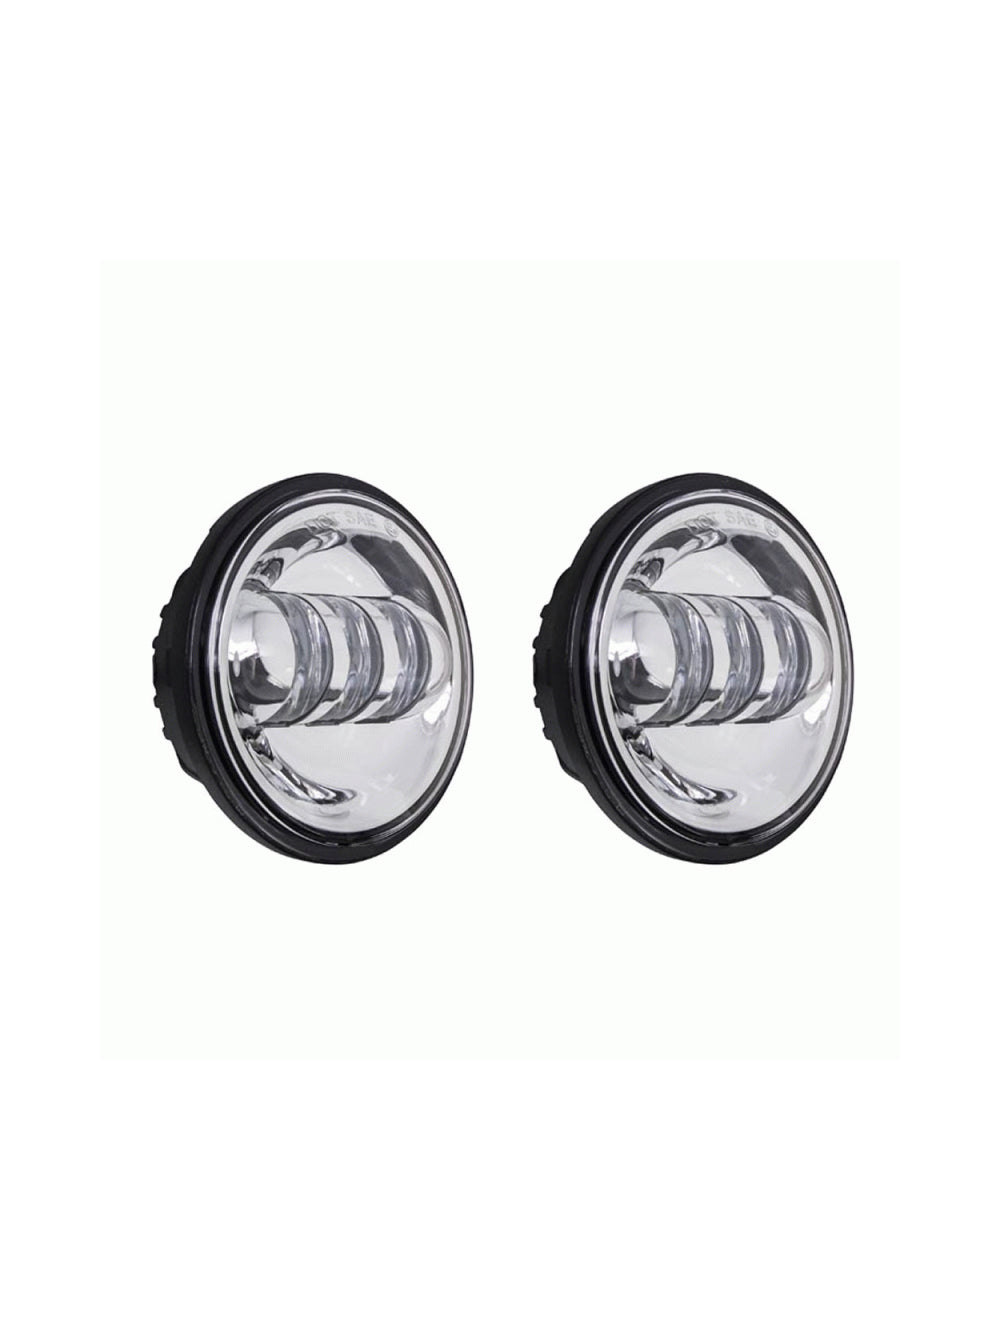 Heise HE-SAL451 Motorcycle 4.5 Inch Aux Pair Silver Front 6-Led Headlights